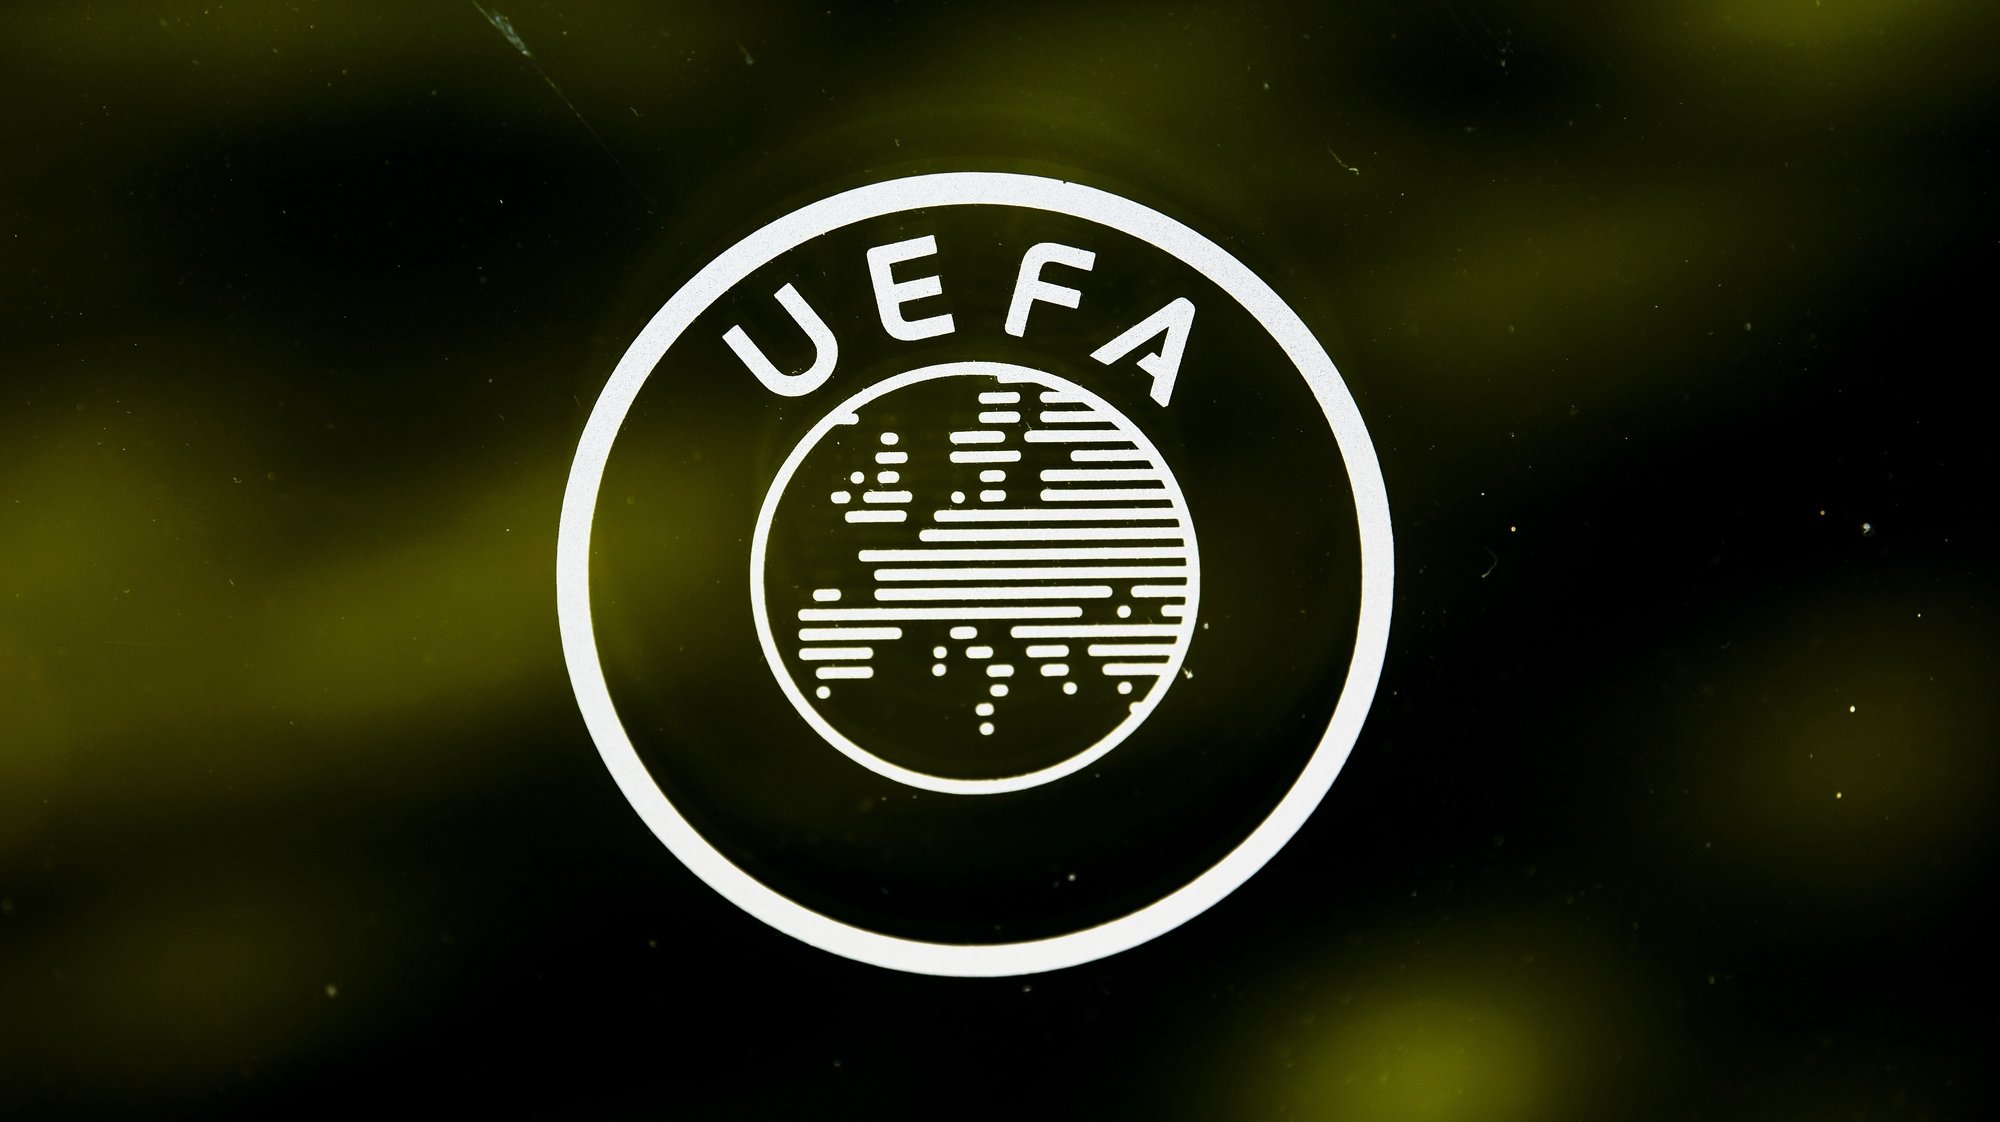 epa08389061 (FILE) - A UEFA logo is pictured through a window prior to the UEFA Europa League 2019/20 Round of 16 draw, at the UEFA Headquarters in Nyon, Switzerland, 28 February 2020 (re-issued on 28 April 2020). UEFA has given 25 May 2020 as a deadline date to European Leagues to decide wether to cancel or restart their seasons after the suspension amid COVID-19 coronavirus pandemic. UEFA&#039;s president Aleksander Ceferin explained that &#039;National Associations and/or Leagues should communicate to UEFA by 25 May 2020 the planned restart of their domestic competitions&#039;. In case of cancelation &#039;UEFA would require the National Association to explain the special circumstances justifying such premature termination and to select clubs for the UEFA club competitions 2020/21 on the basis of sporting merit in the 2019/20 domestic competitions&#039;.  EPA/JEAN-CHRISTOPHE BOTT *** Local Caption *** 55997733